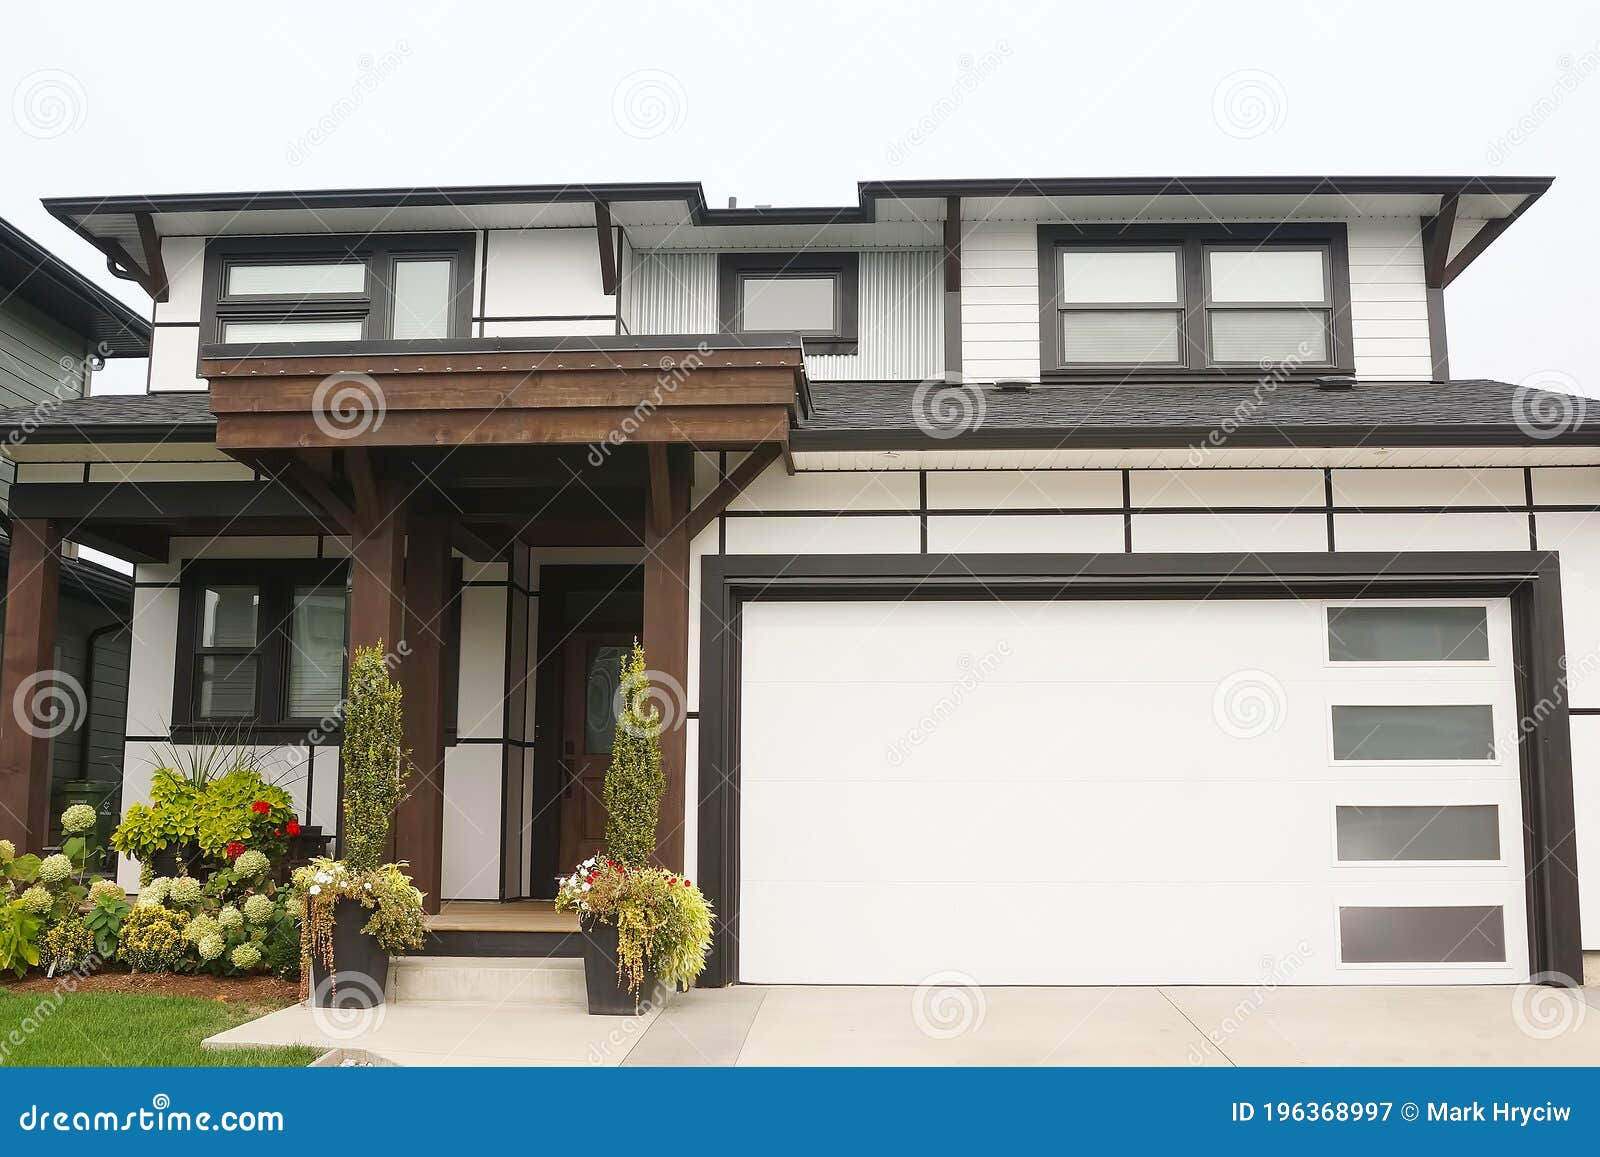 8 988 Exterior Elevation Photos Free Royalty Free Stock Photos From Dreamstime